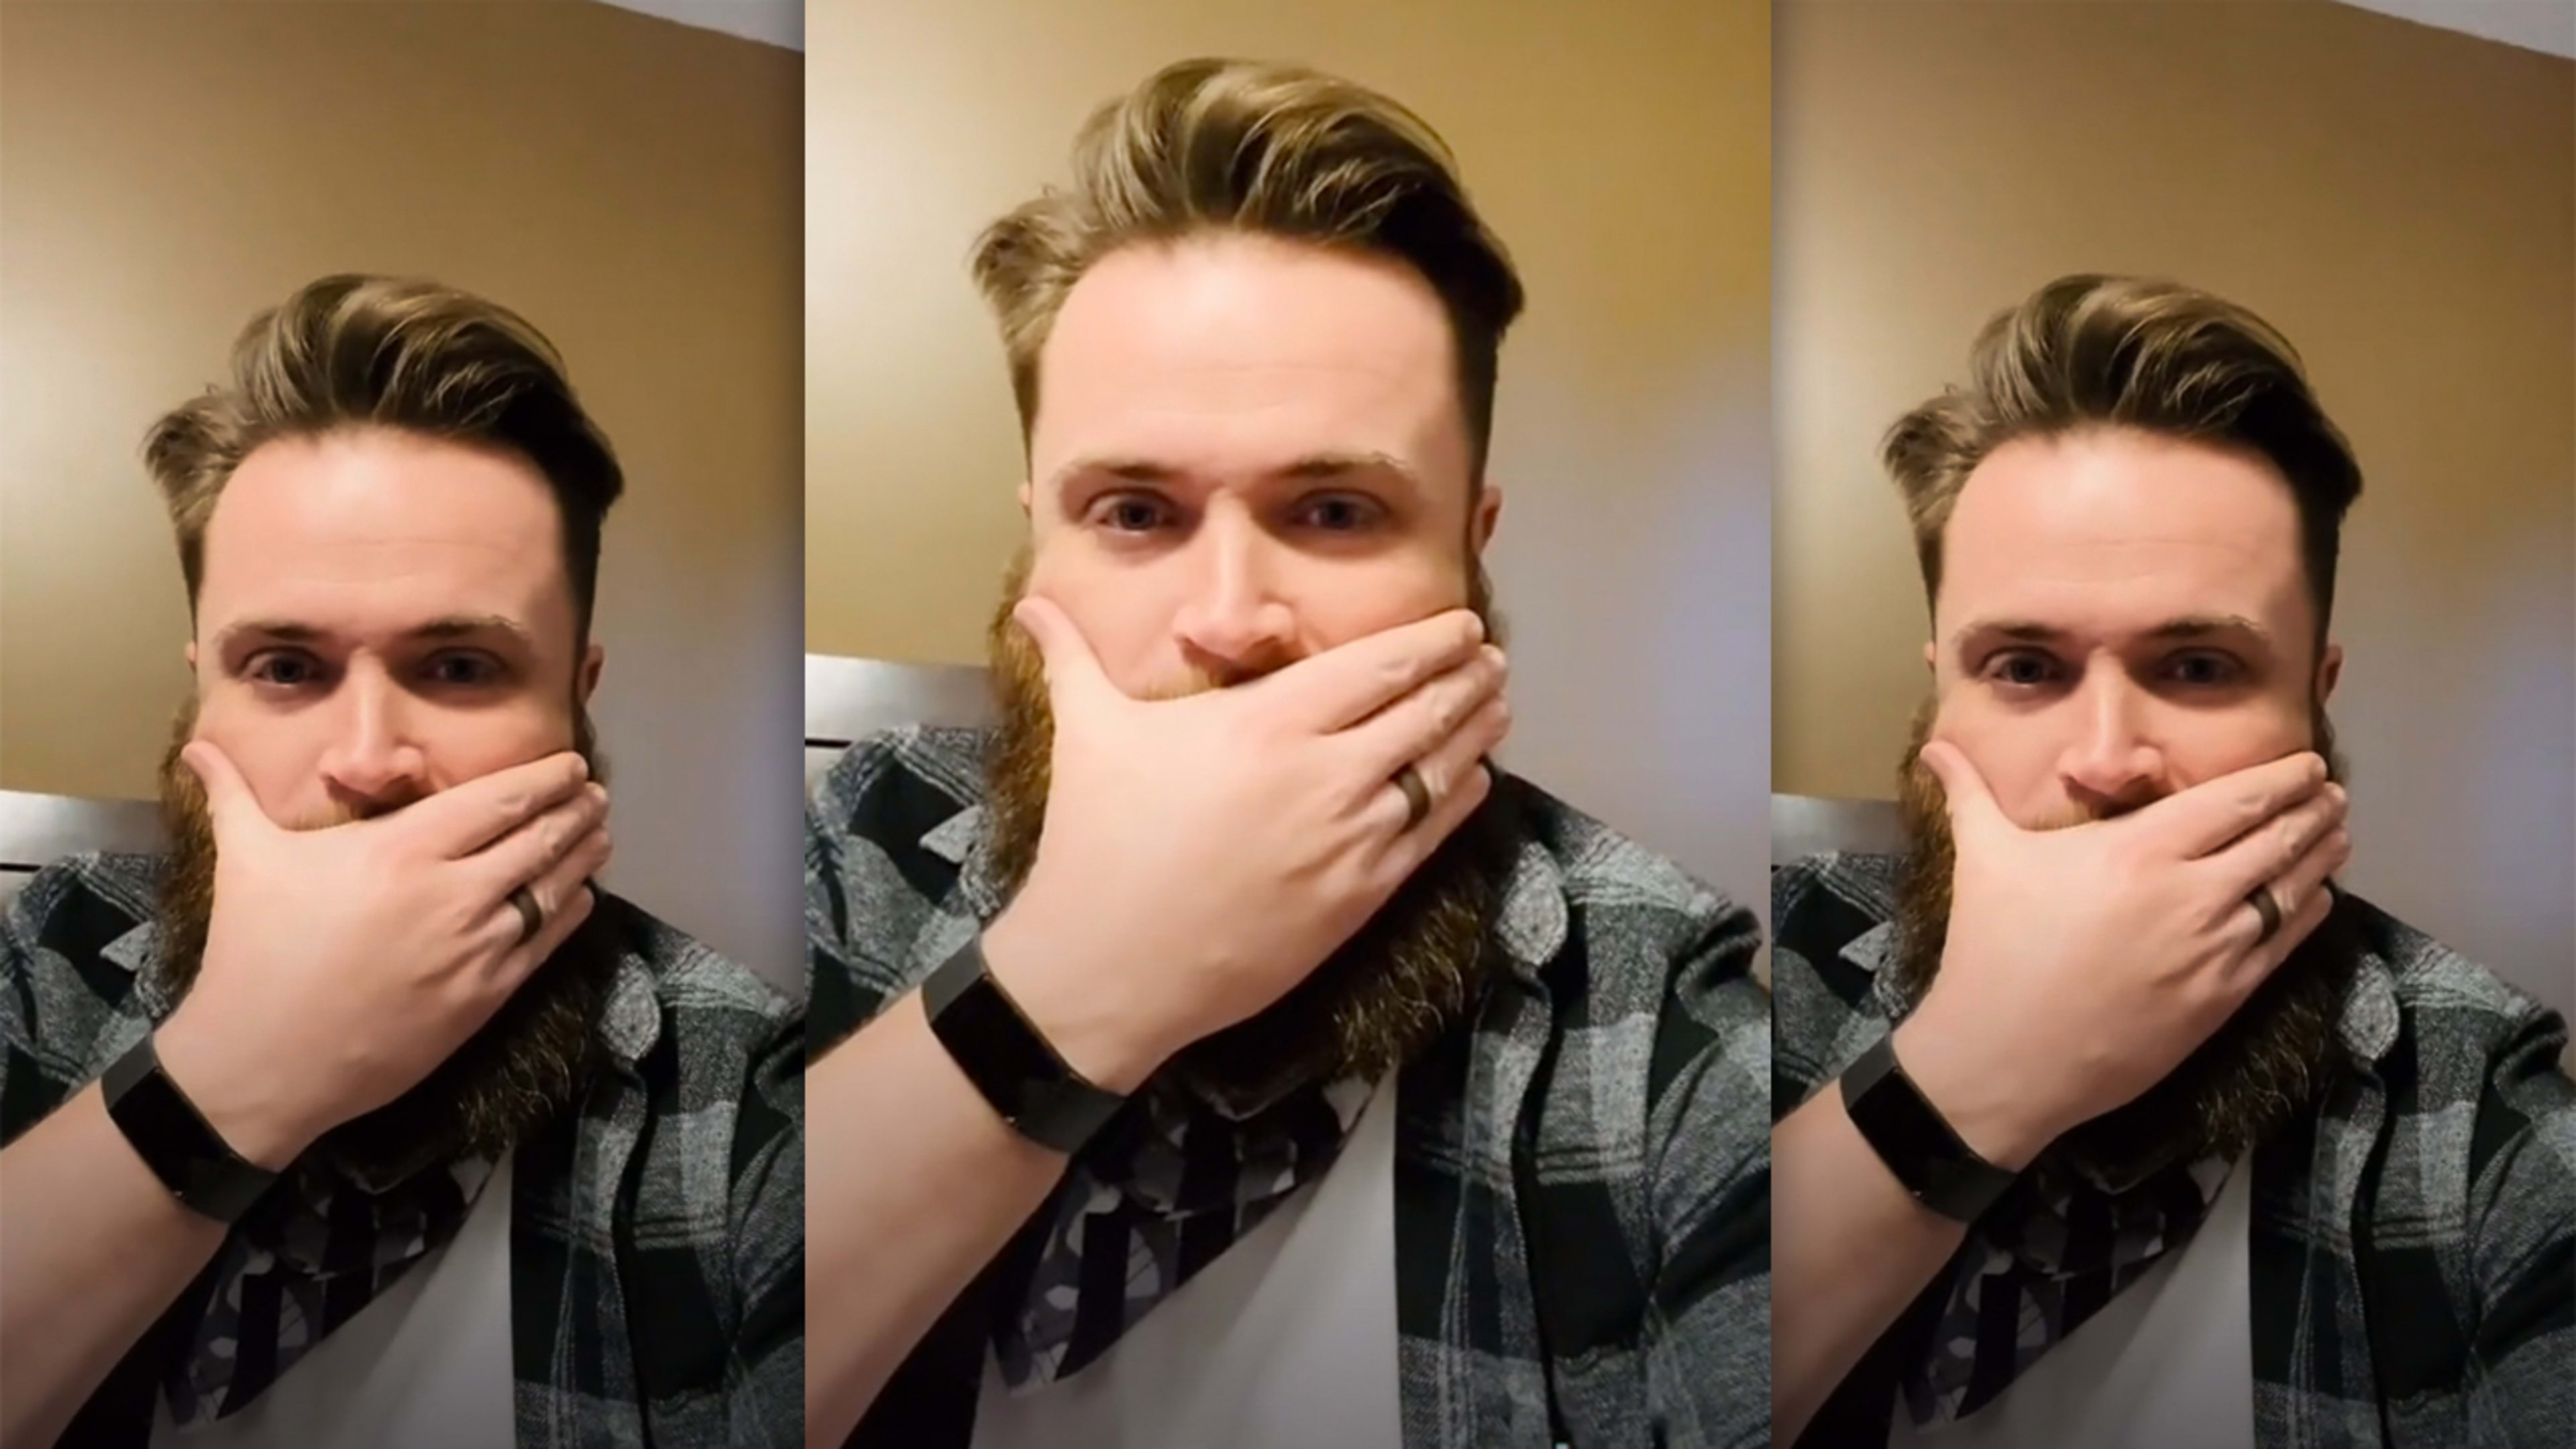 ‘No beard’ filter: how to get the viral Snapchat filter and use it on TikTok